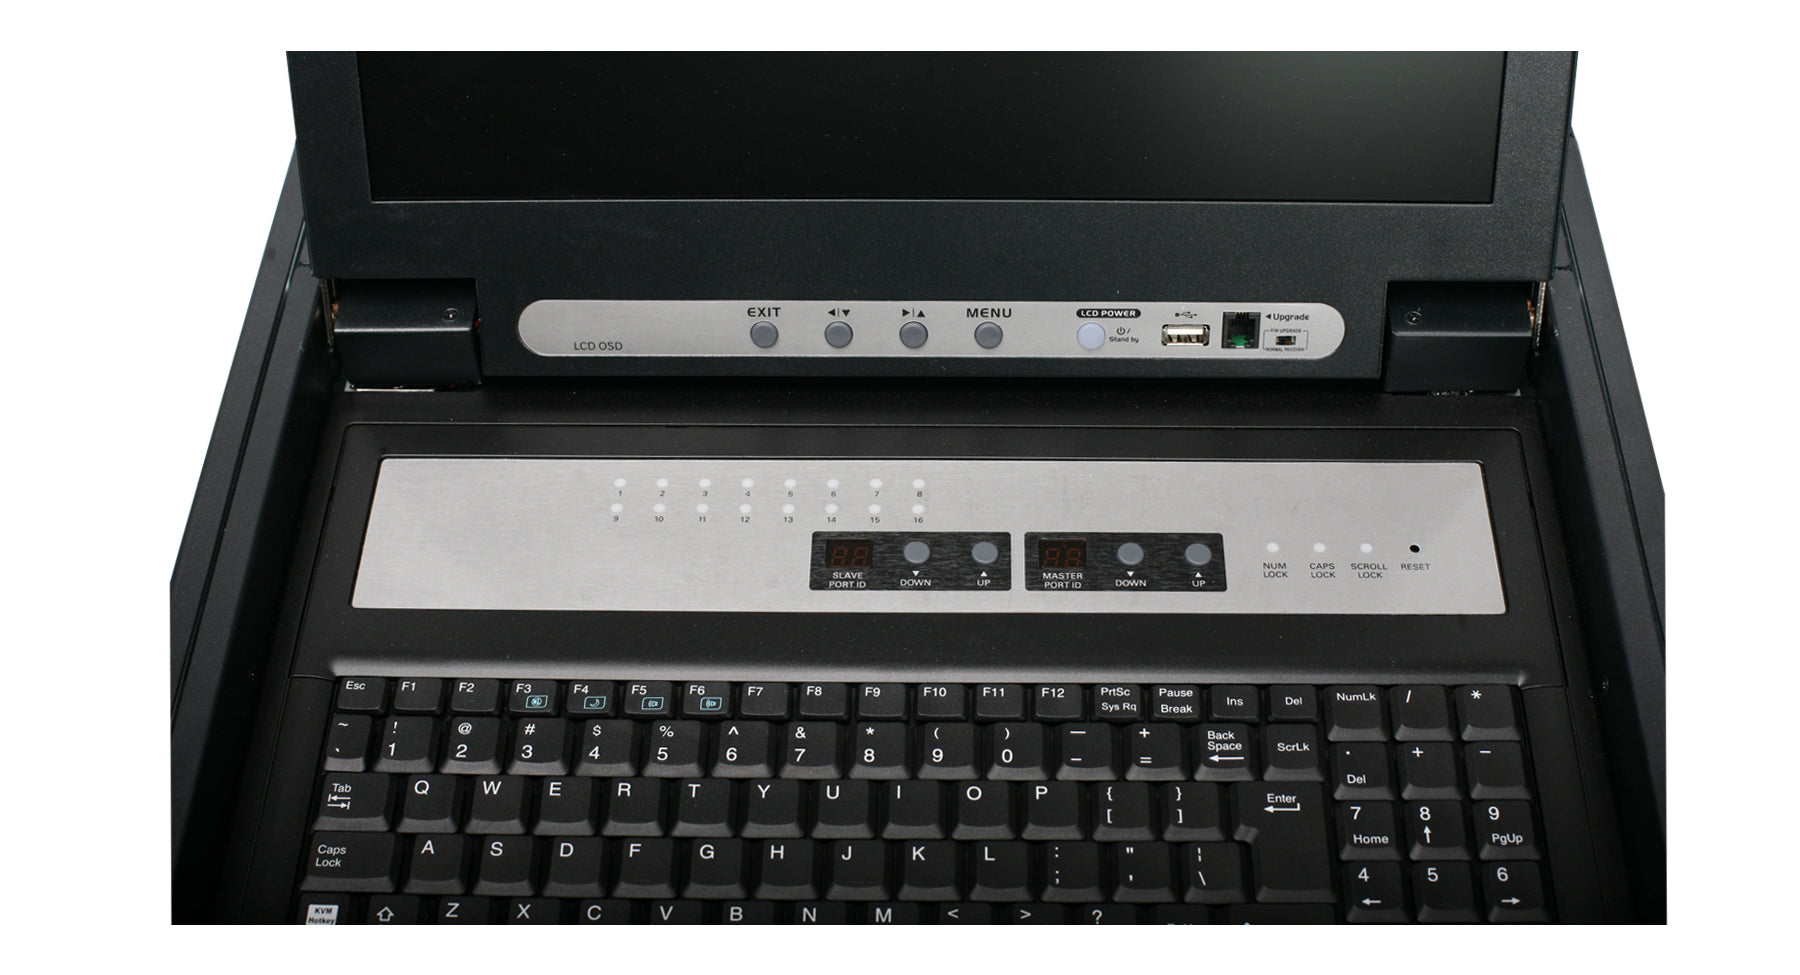 16-Port LCD Combo KVM Switch with Cables